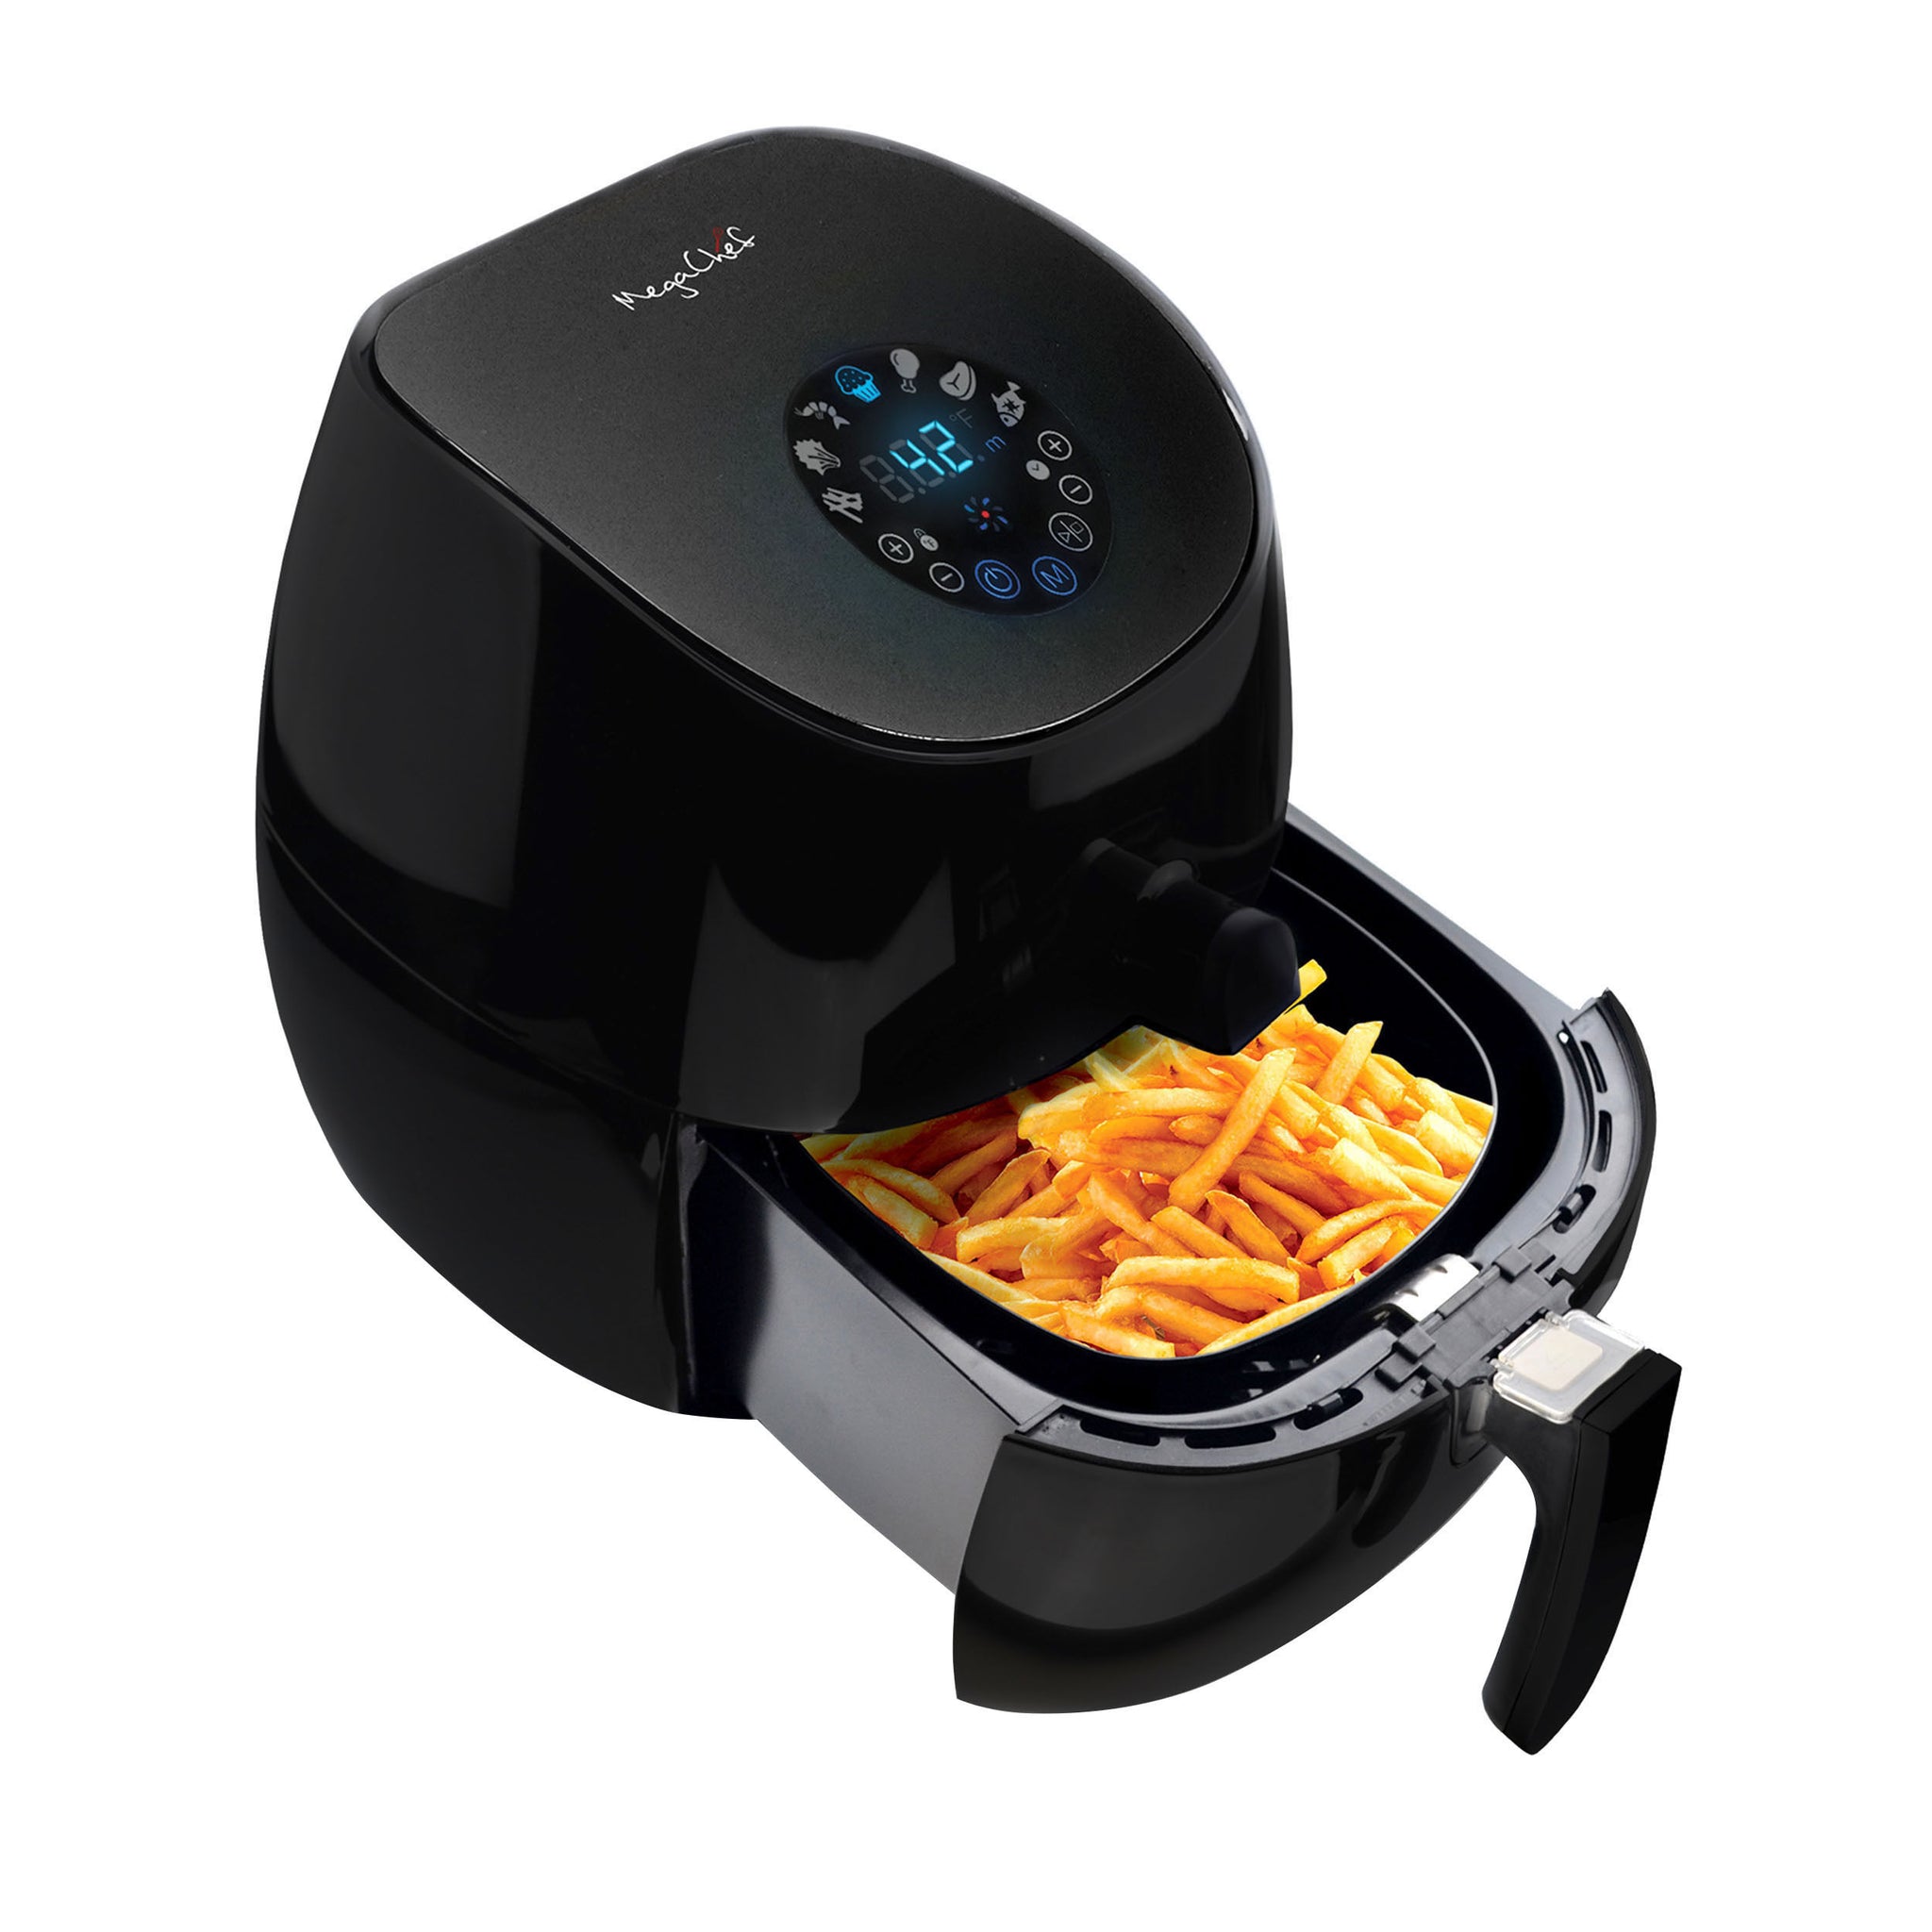 MegaChef 3.5 Quart Airfryer And Multicooker With 7 Pre-programmed Settings in Sleek Black - Team Spirit Store USA 